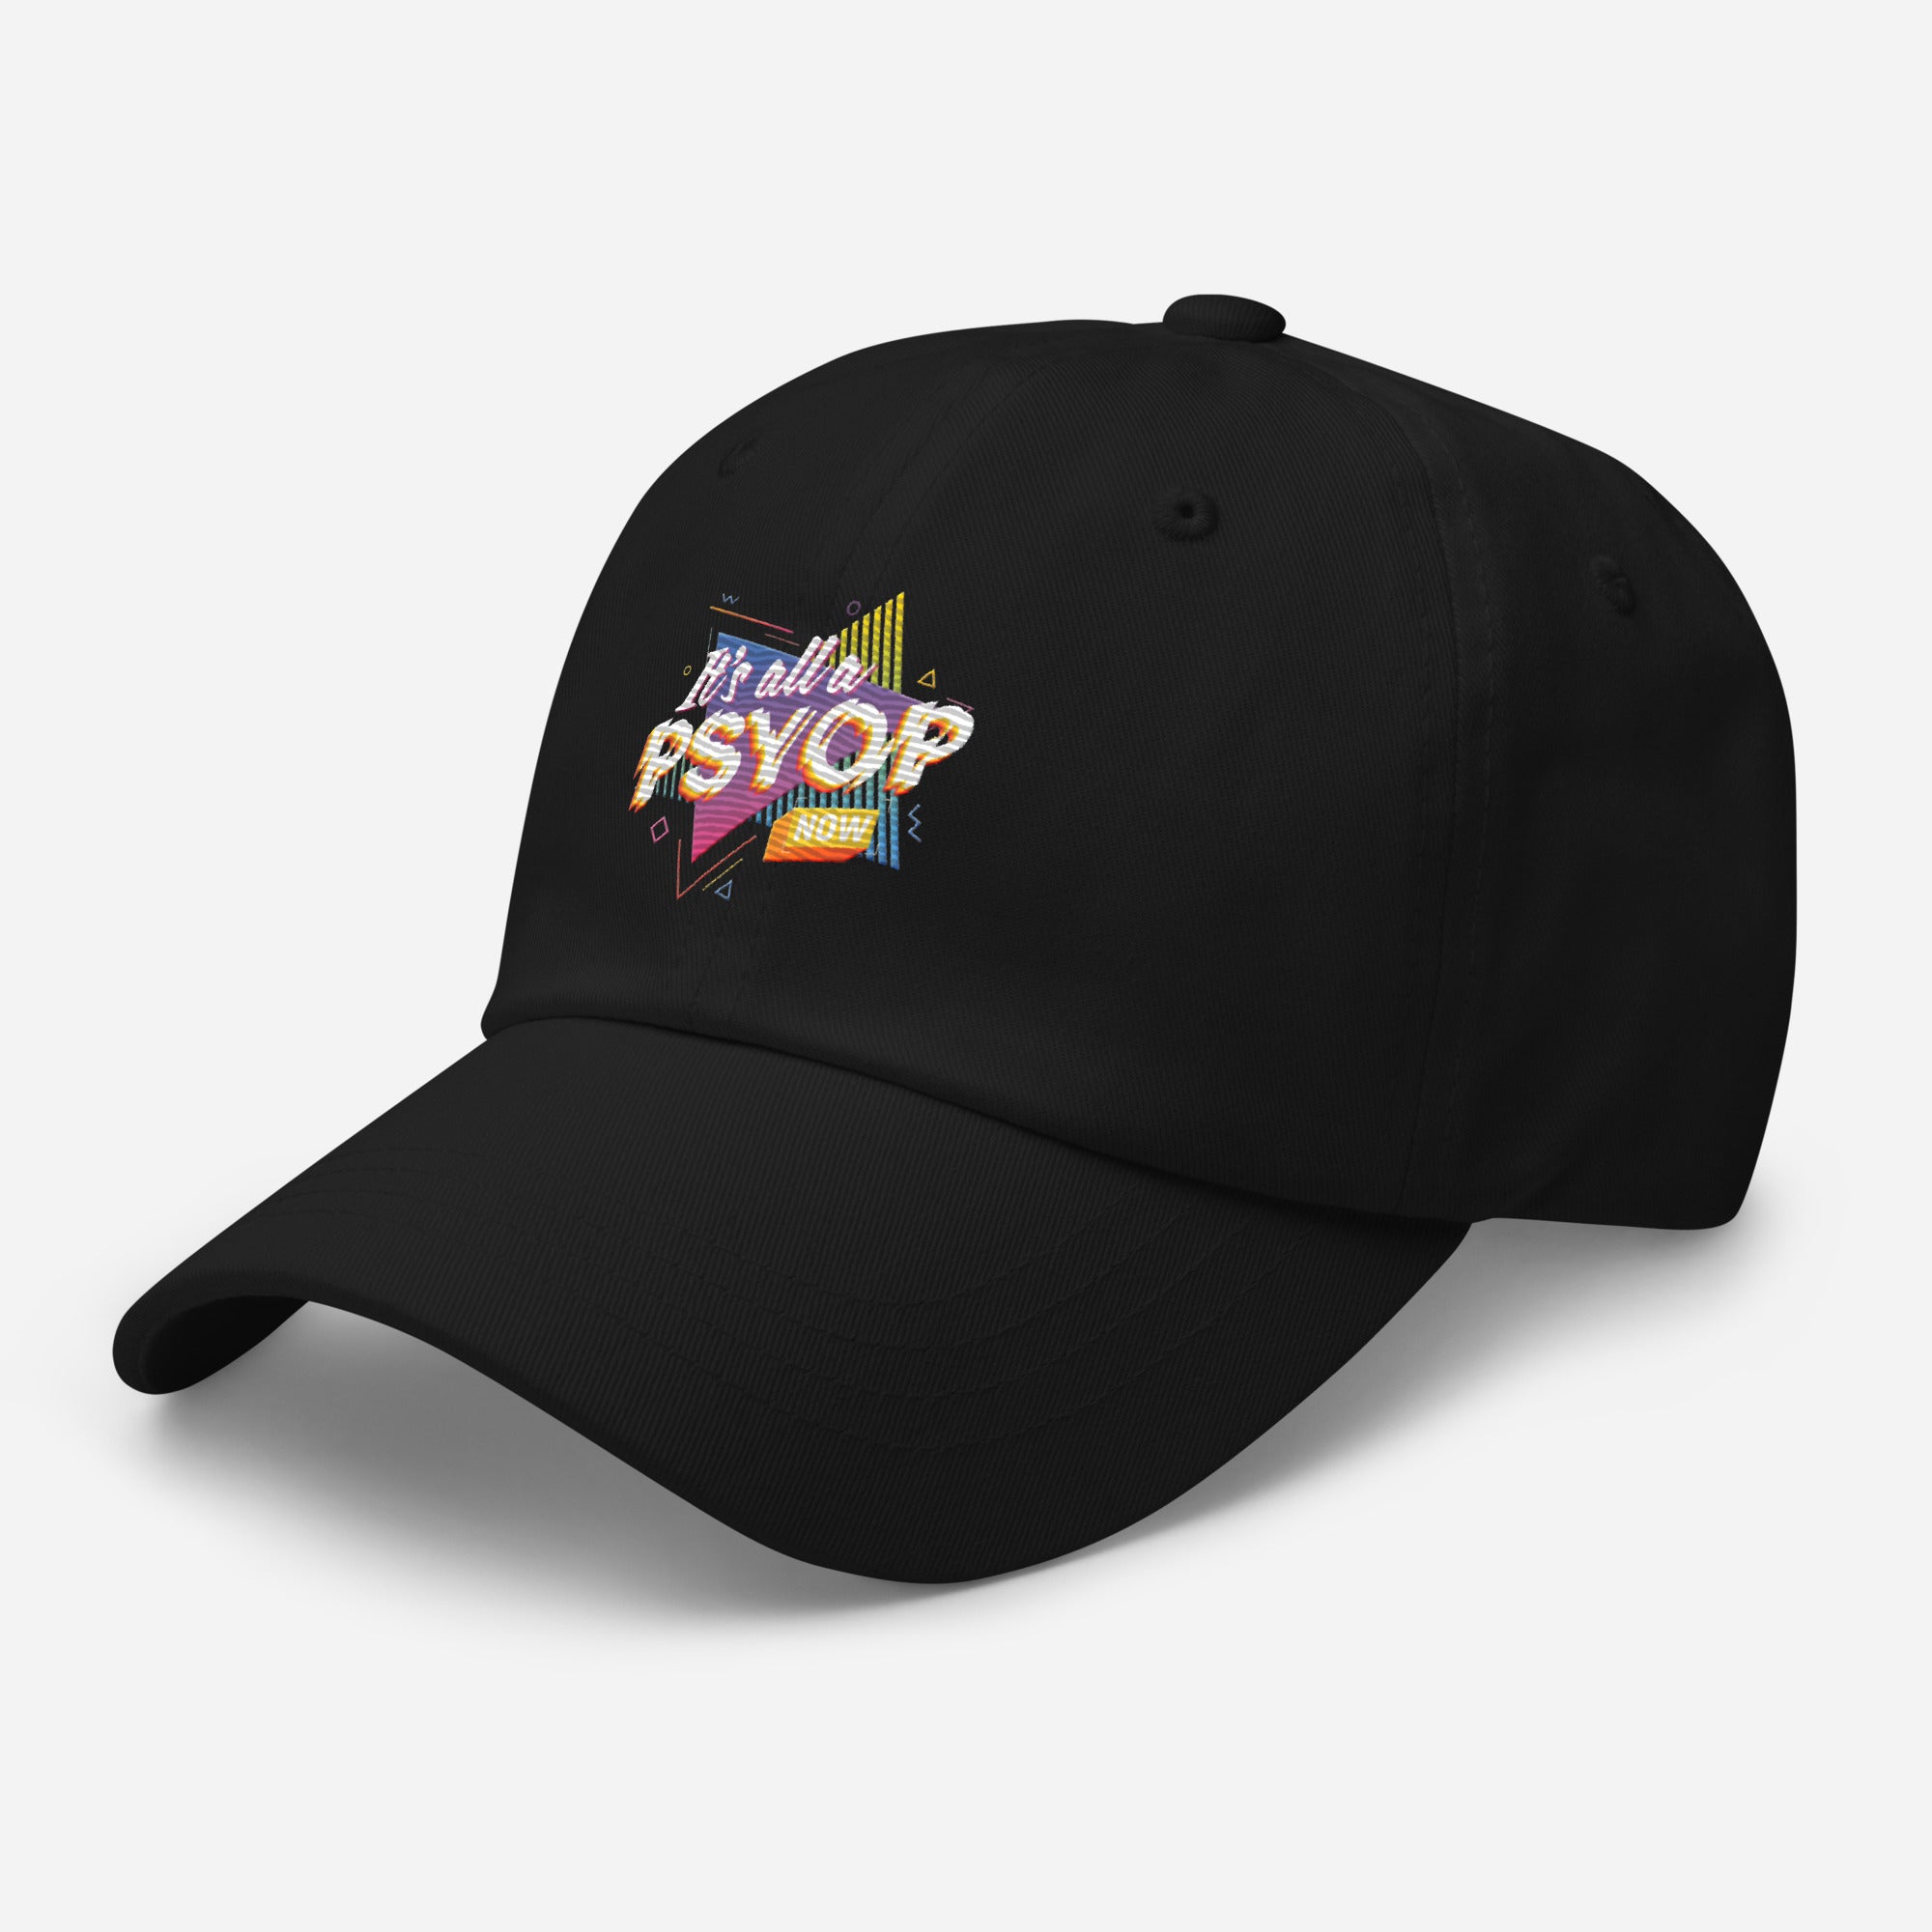 It's All A Psyop Now Dad hat